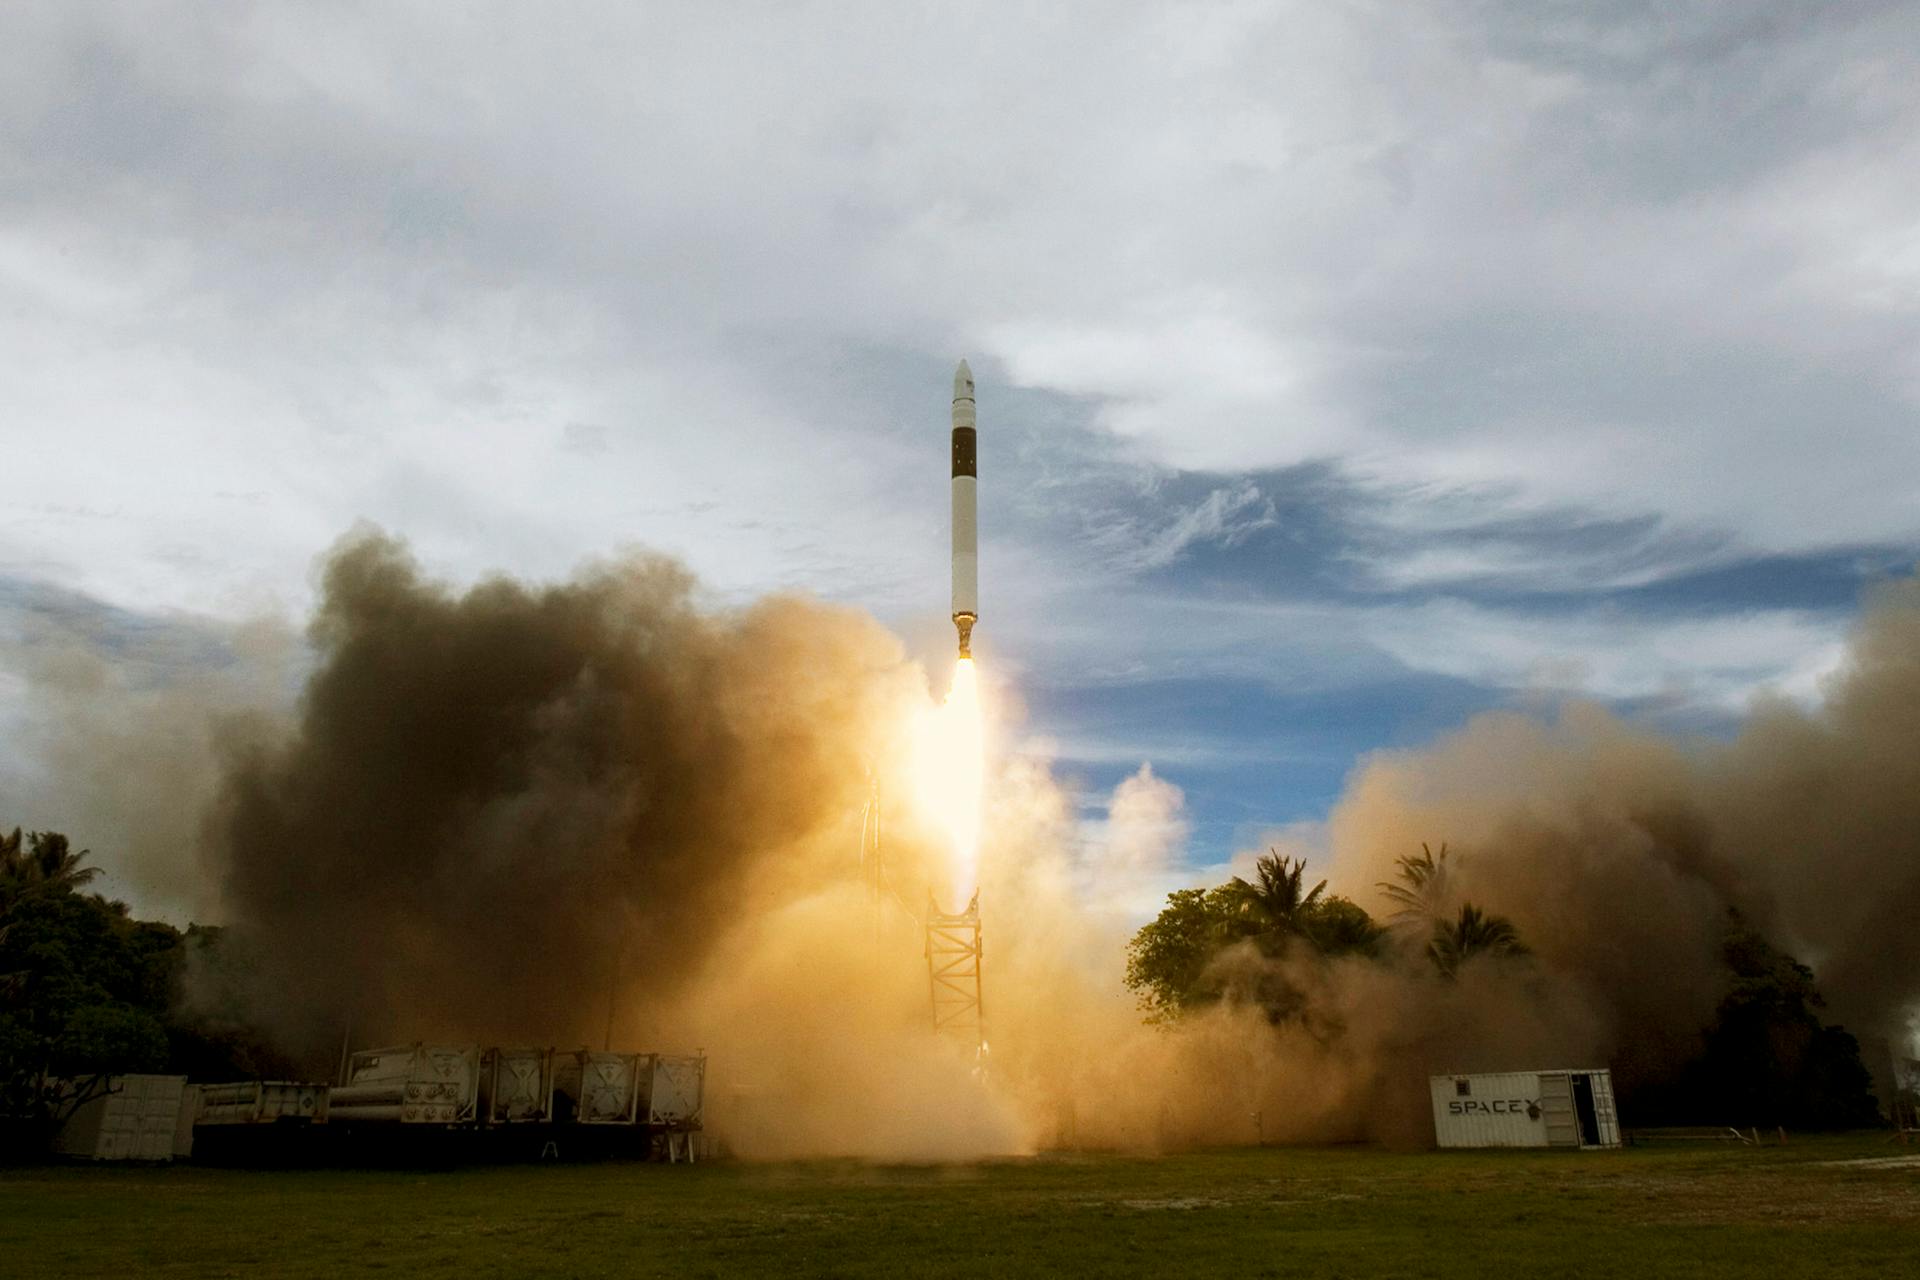 Liftoff of spacecraft on cloudy day